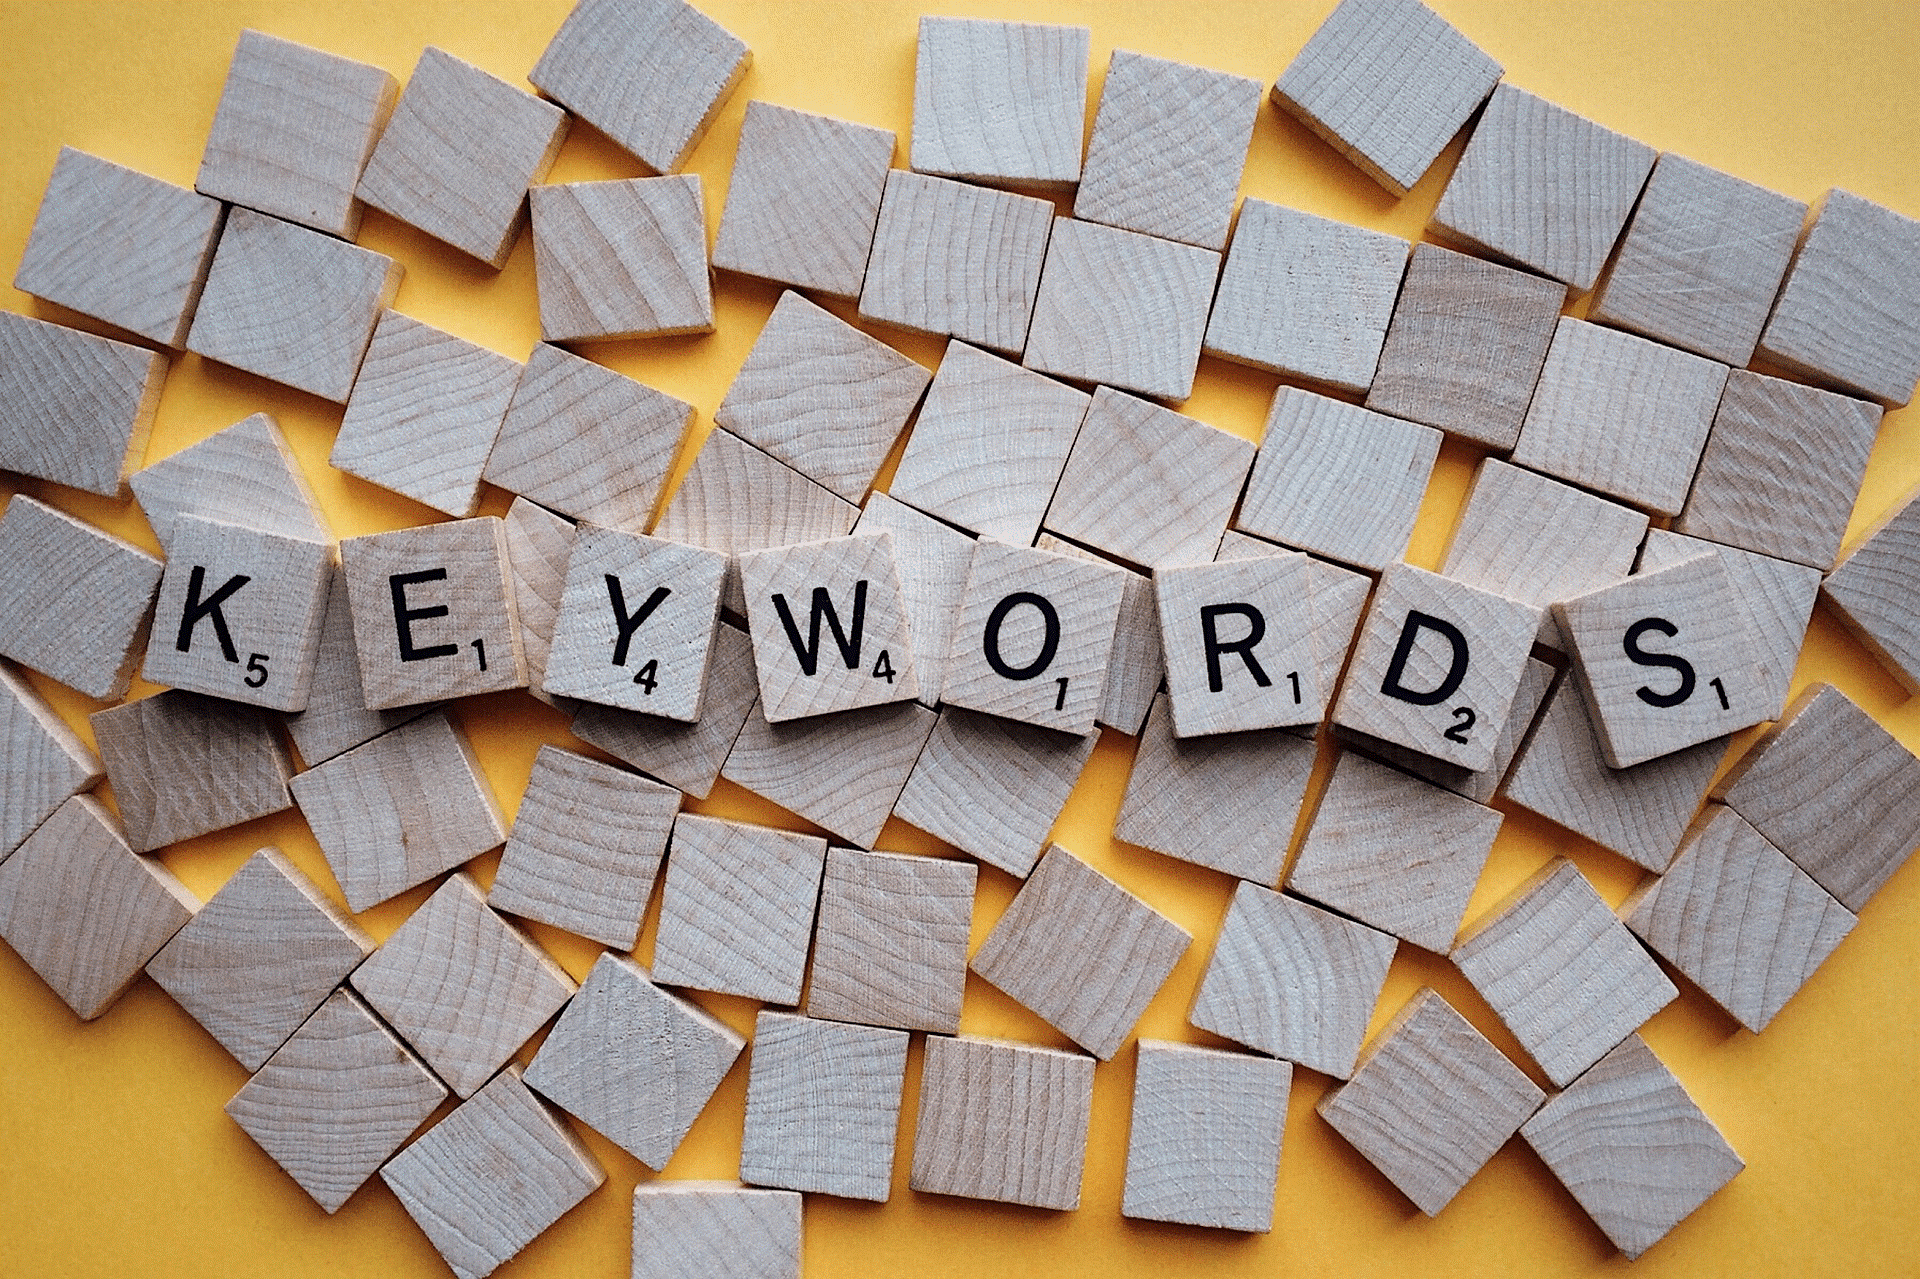 Keywords are an important part of a SEO checklist